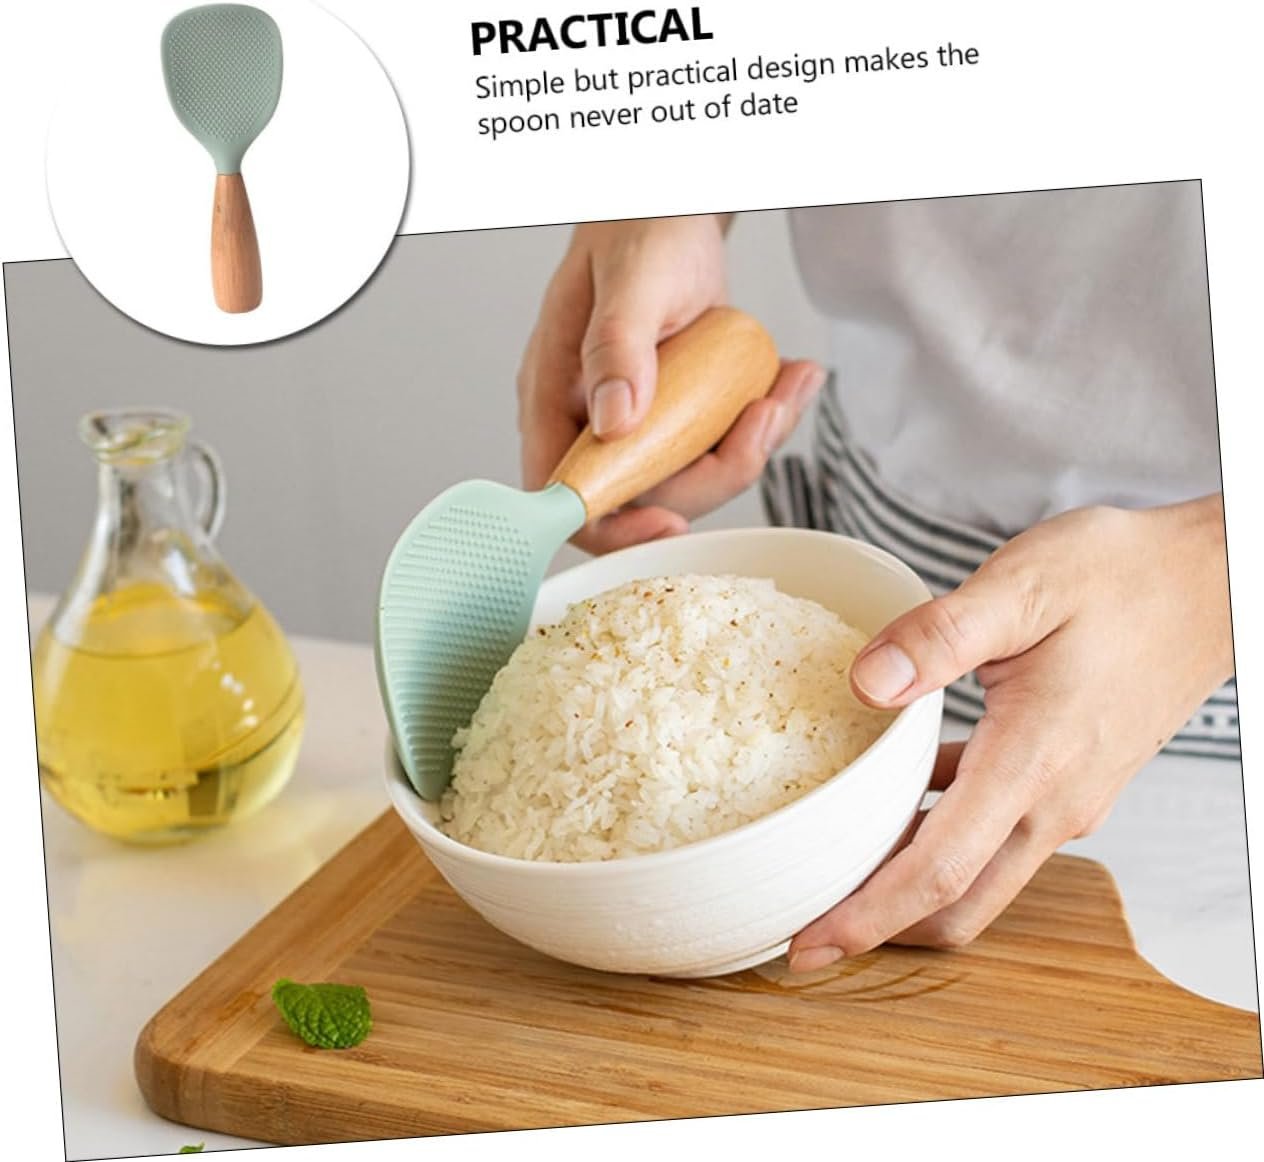 Cabilock Silicone Rice Spoon Kitchen Gadget Korean Rice Paddle Rice Server Spoon Rice Cooking Spoon Vertical Rice Scoop Rice Spatula Compact Rice Scooper Wood Standable Kitchen Supplies